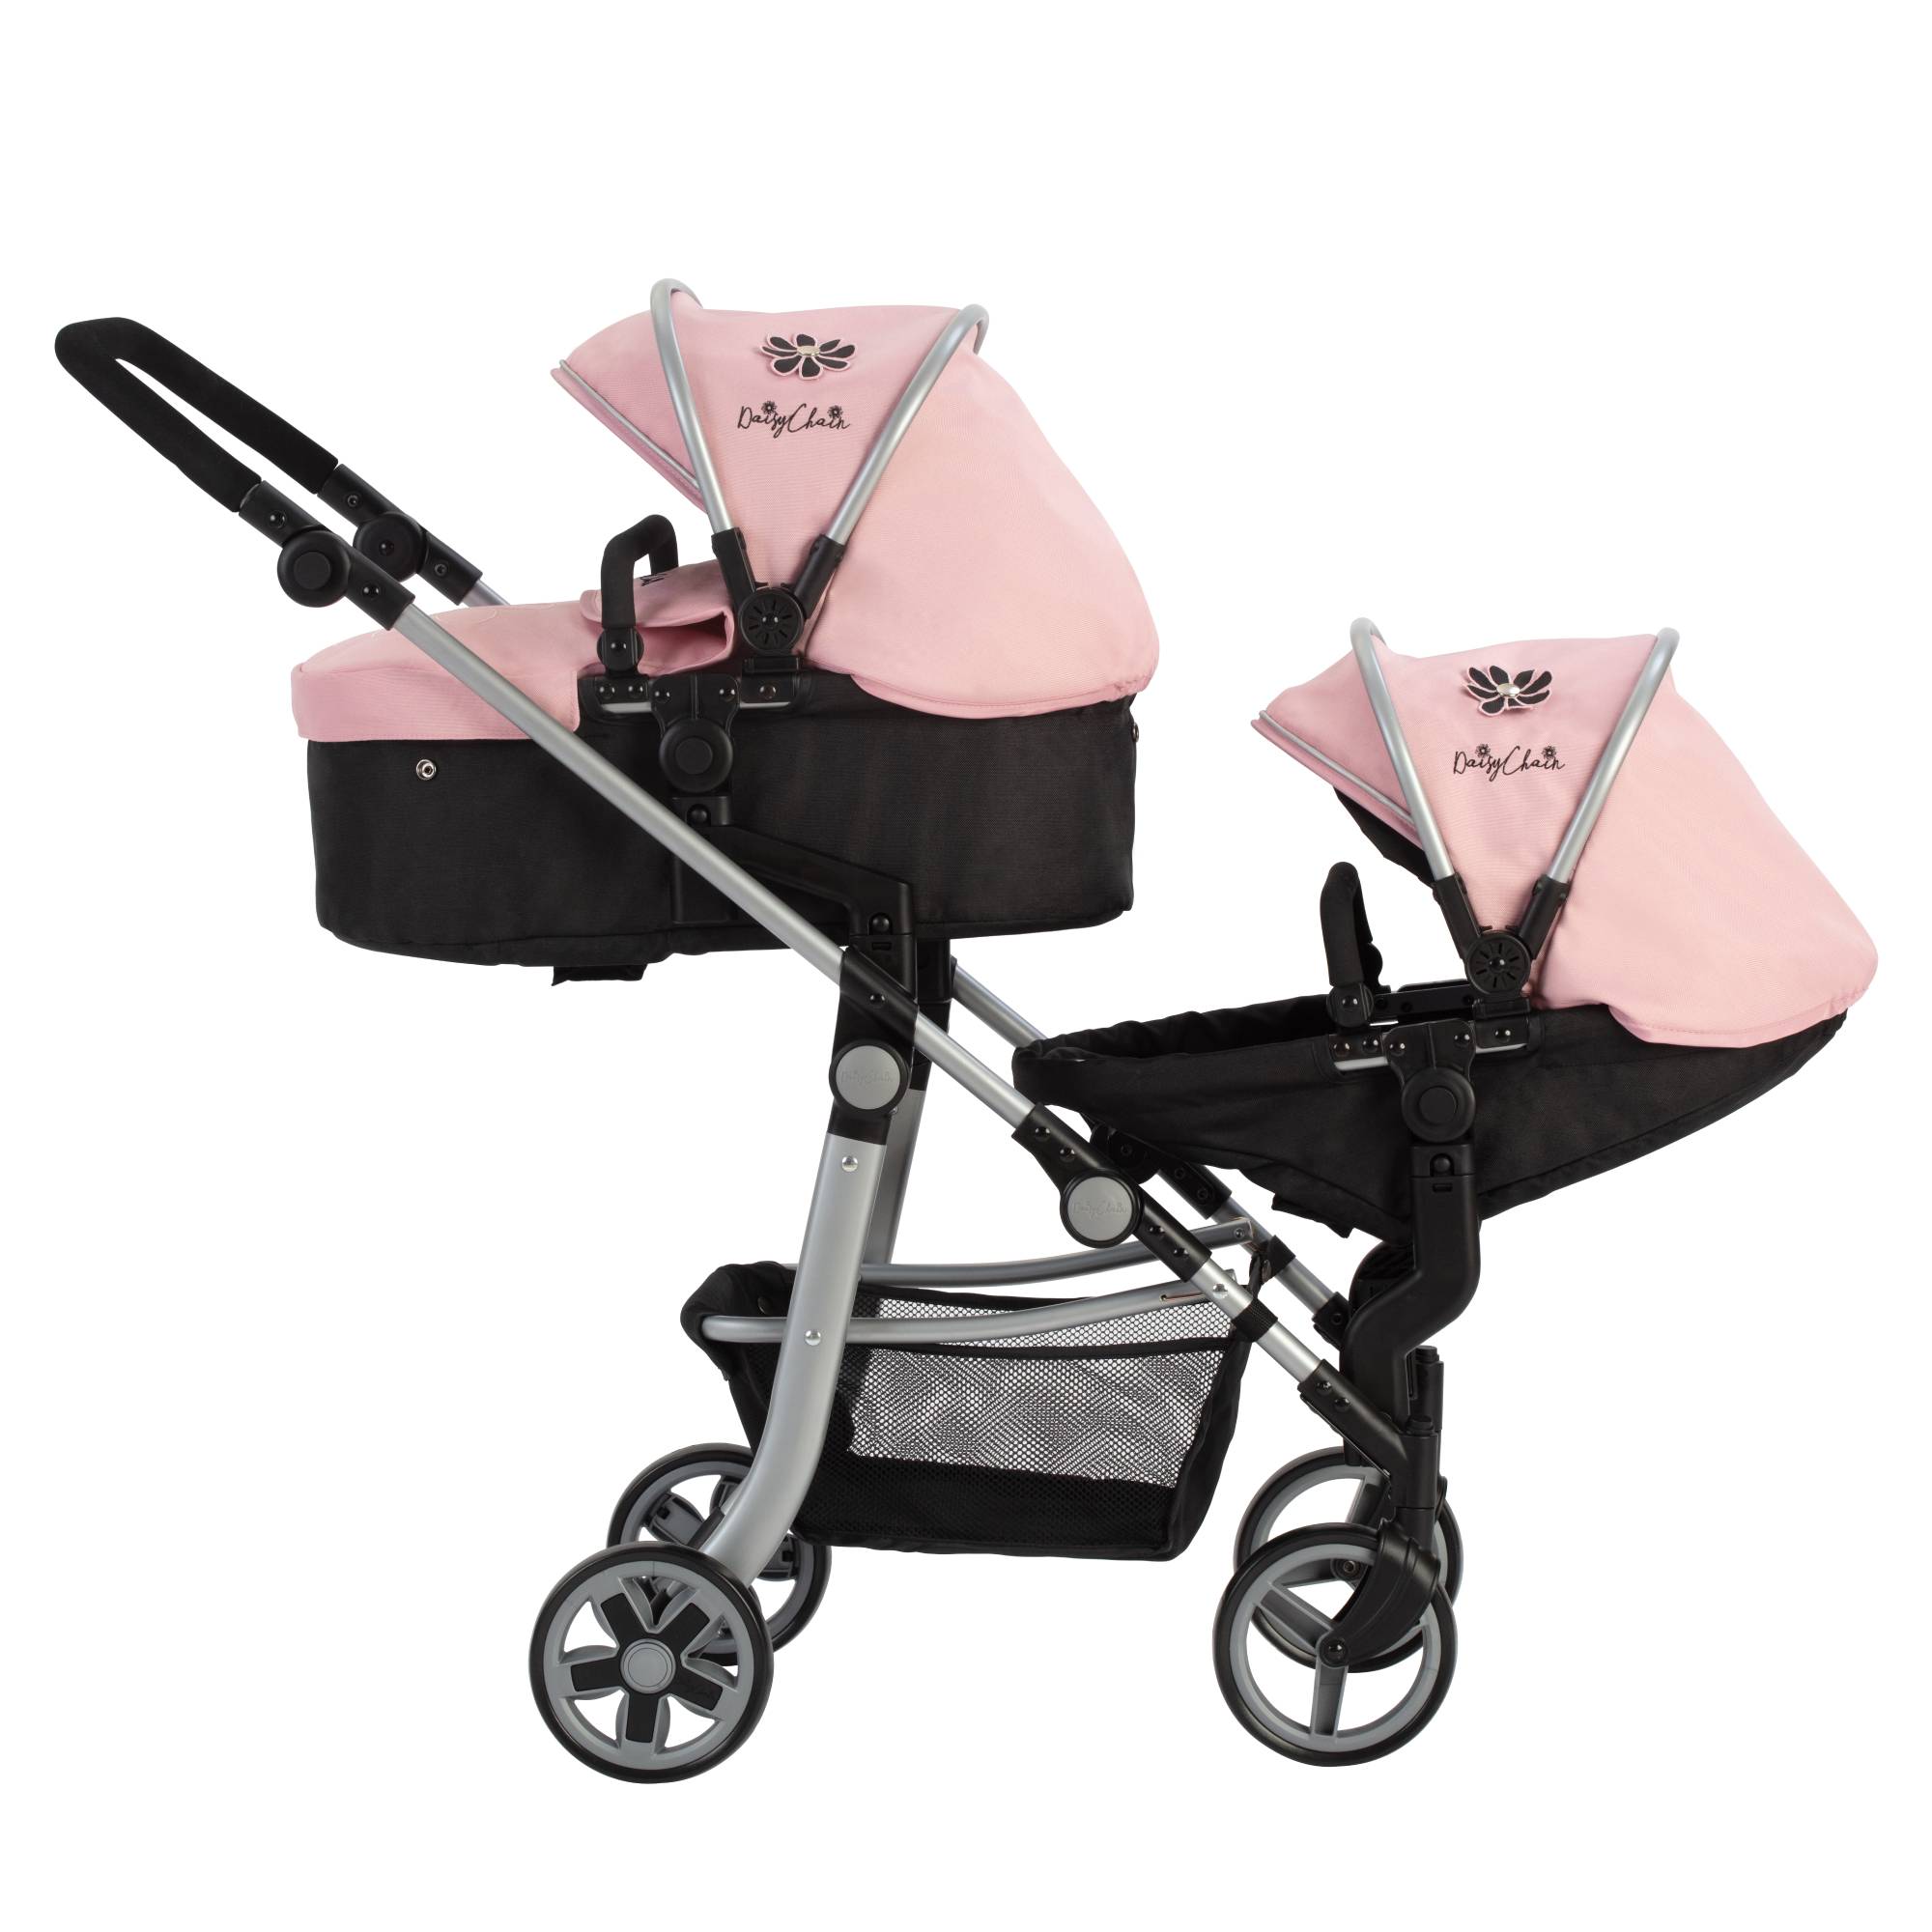 doll prams for 8 year olds